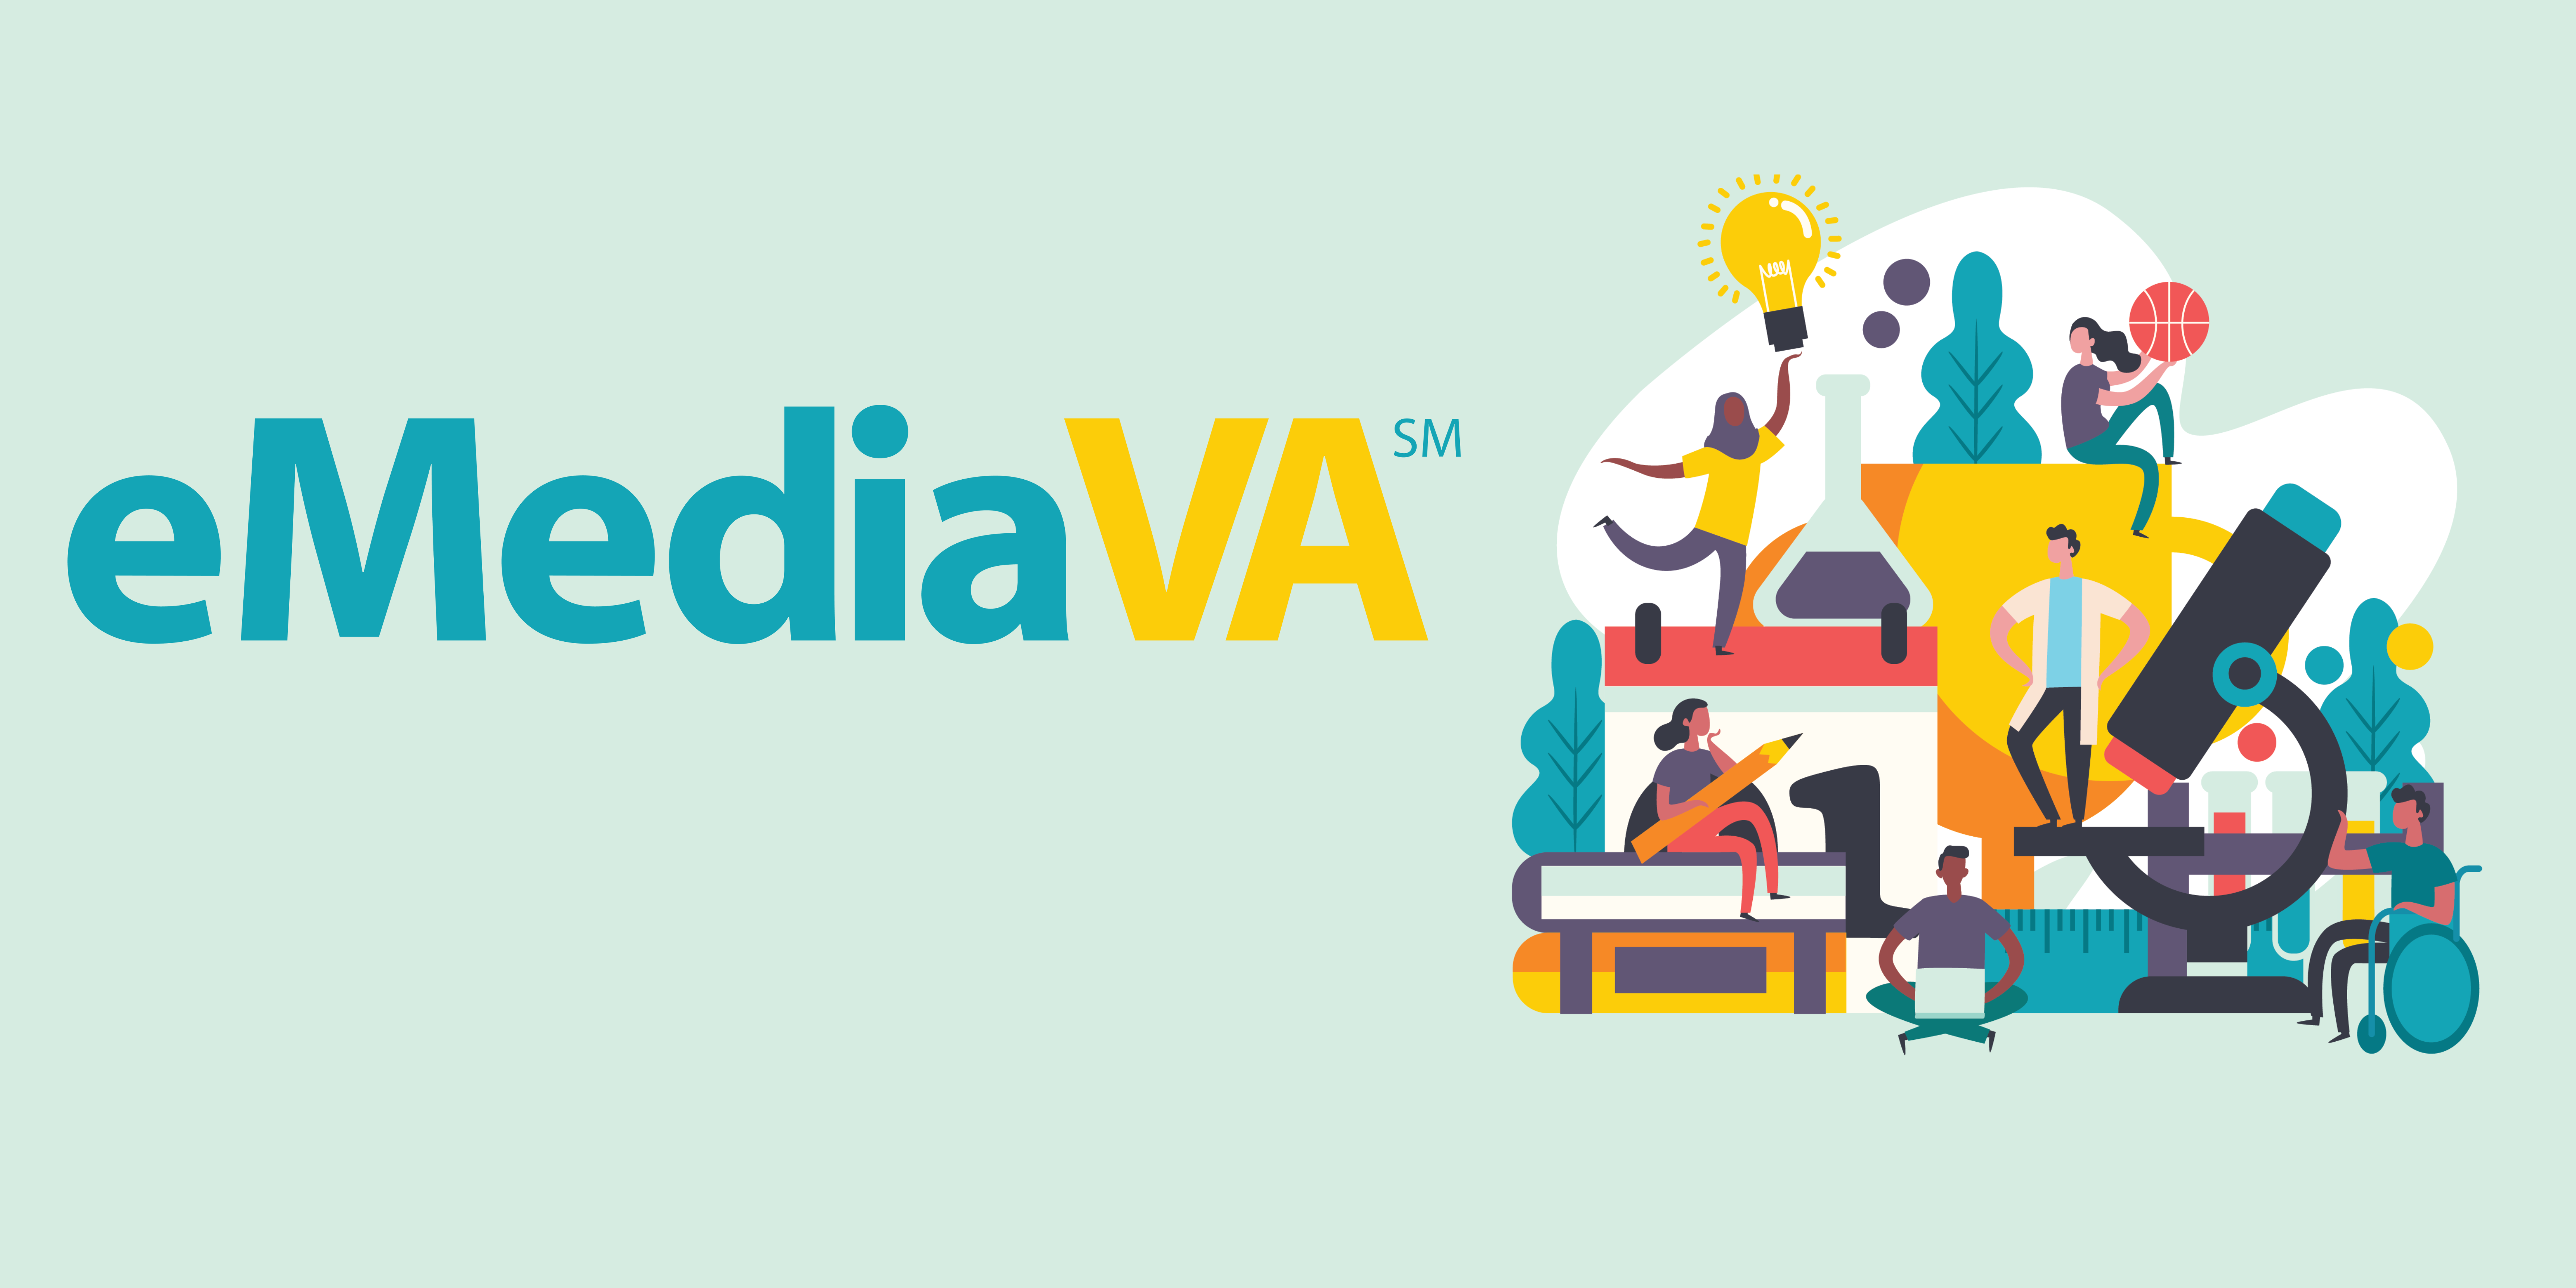 A New eMediaVA Is Coming June 13th!